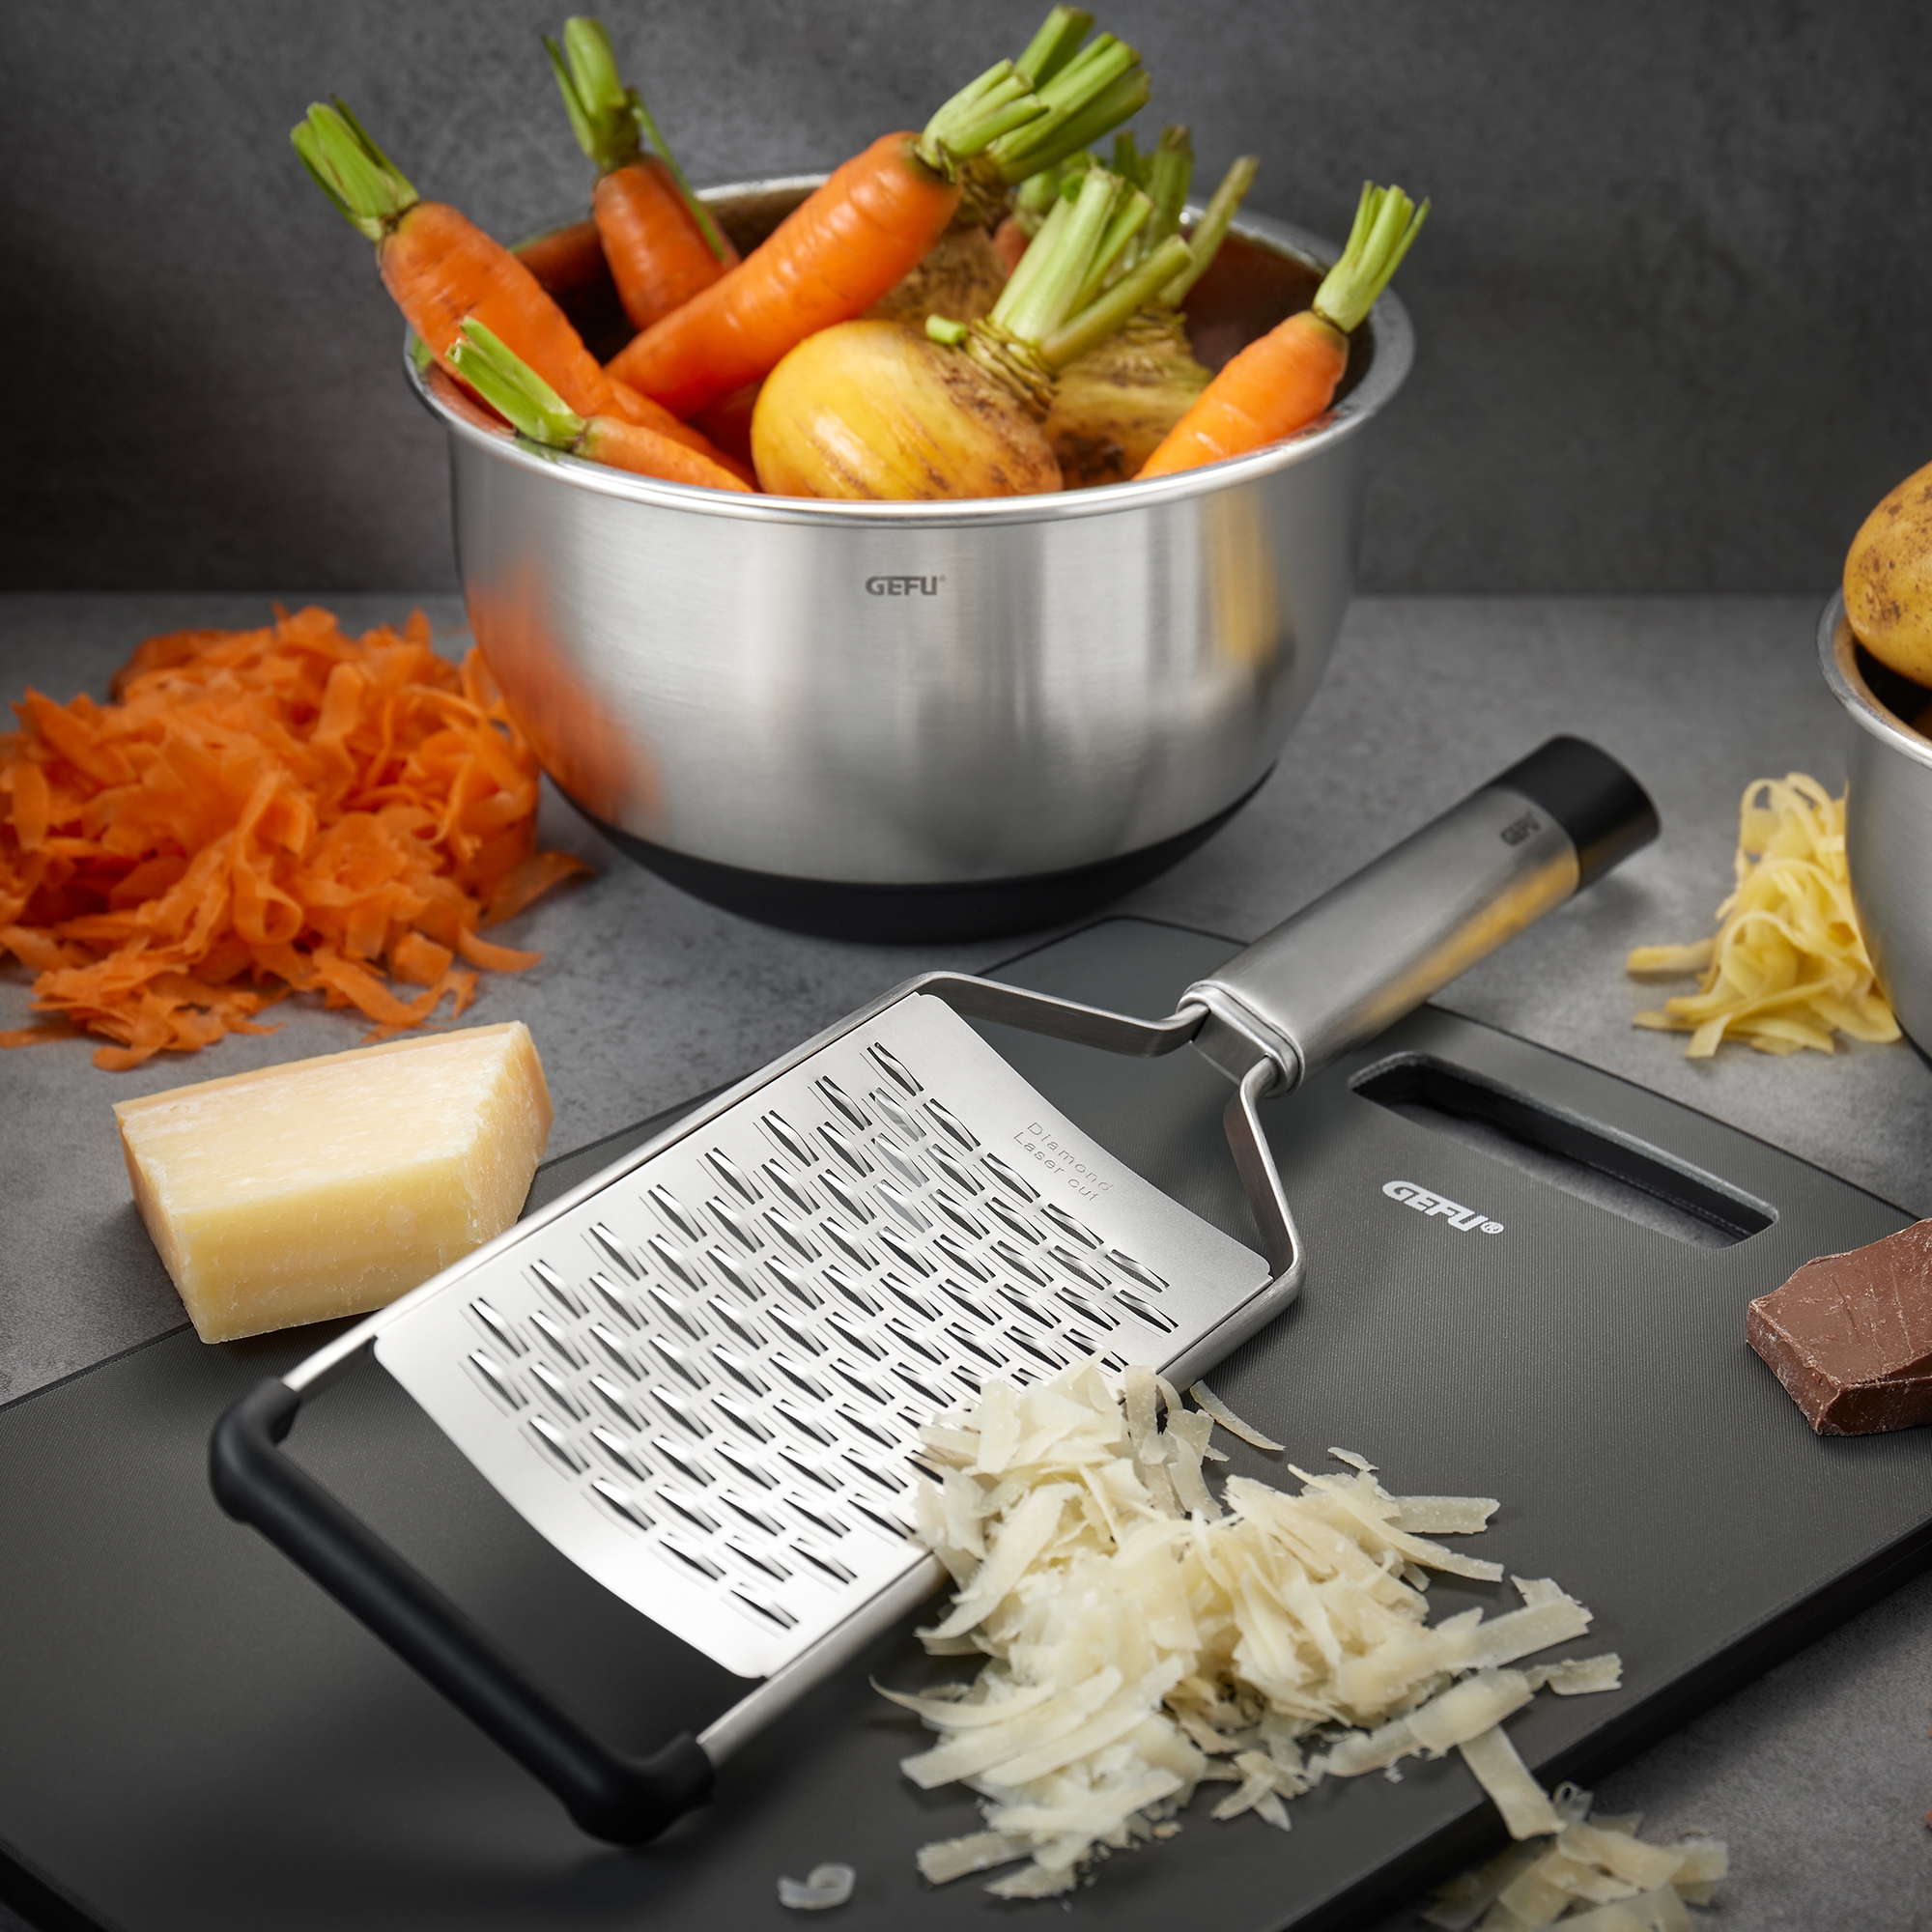 Manual Cheese Grater With Crank - Chocolate Grater, Spiral Cheese